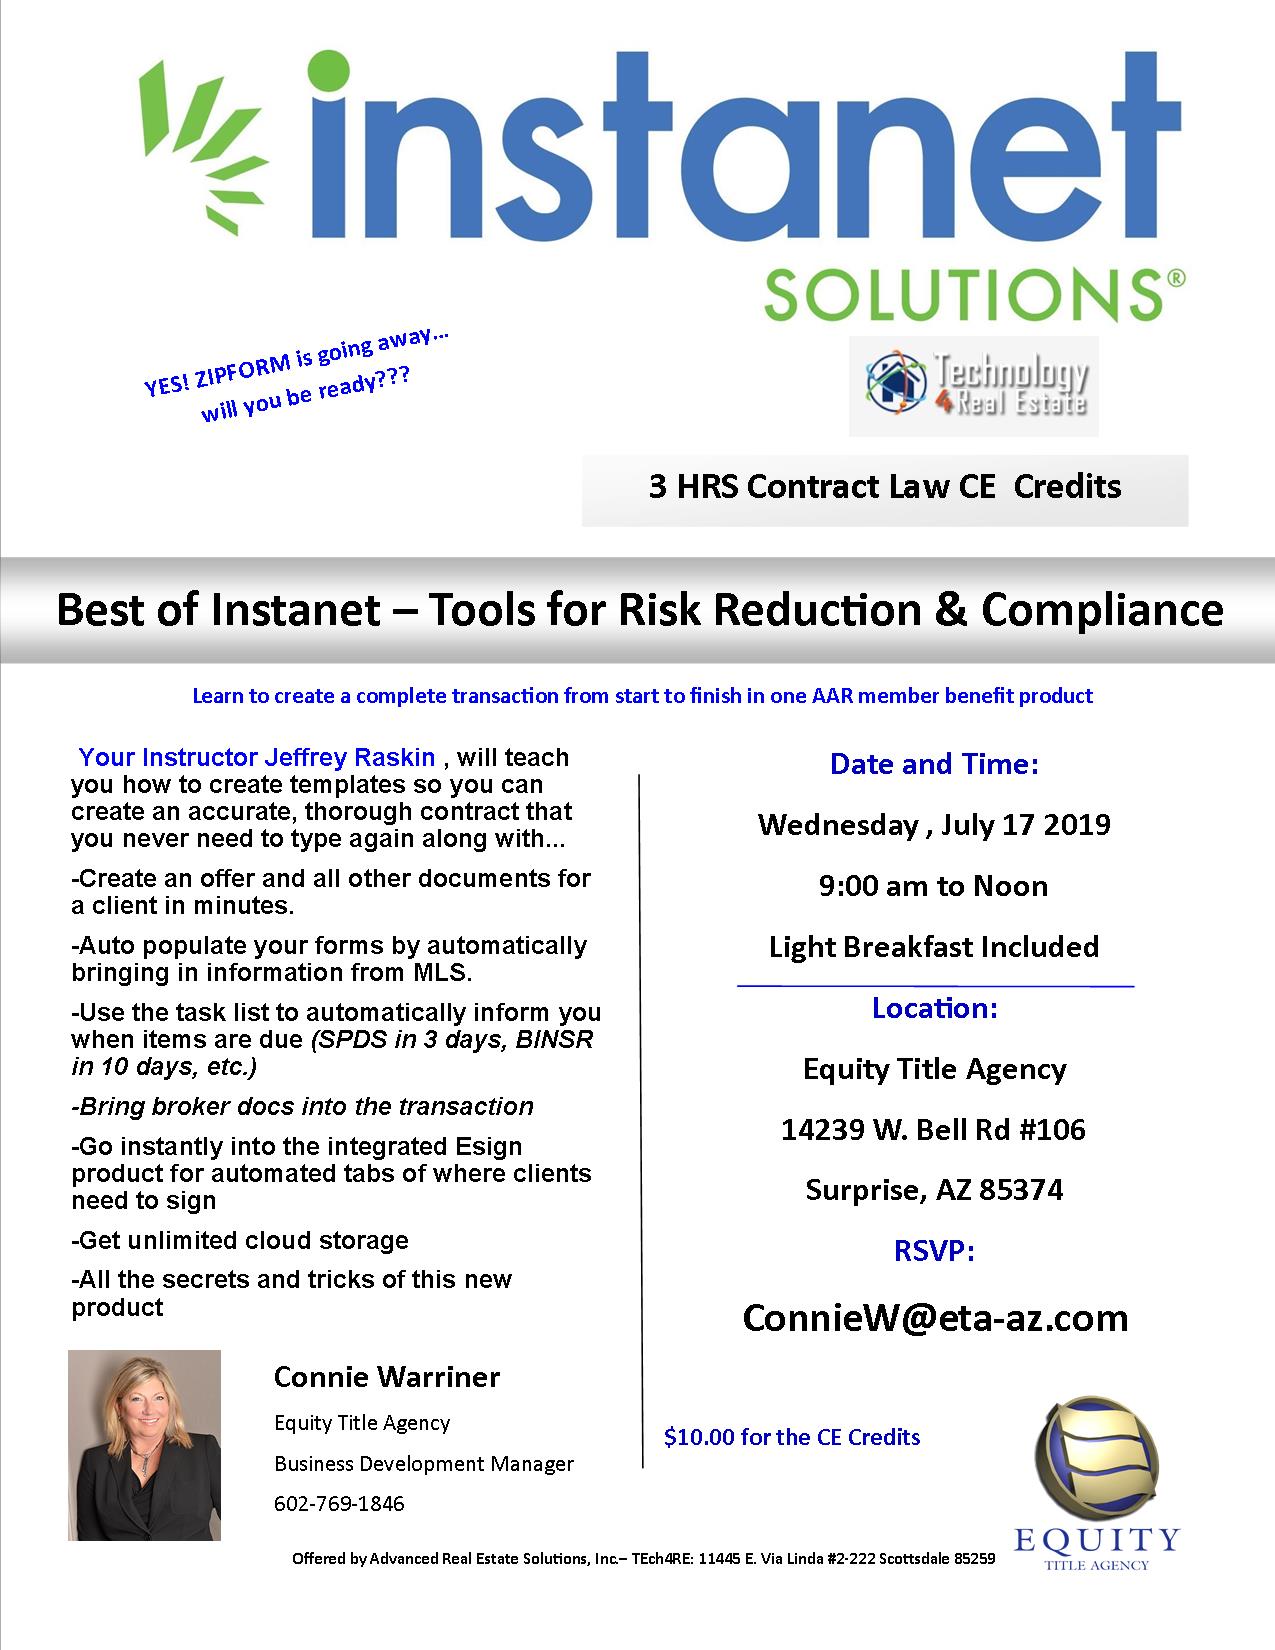 July 17 Conniea Instanet Solutions